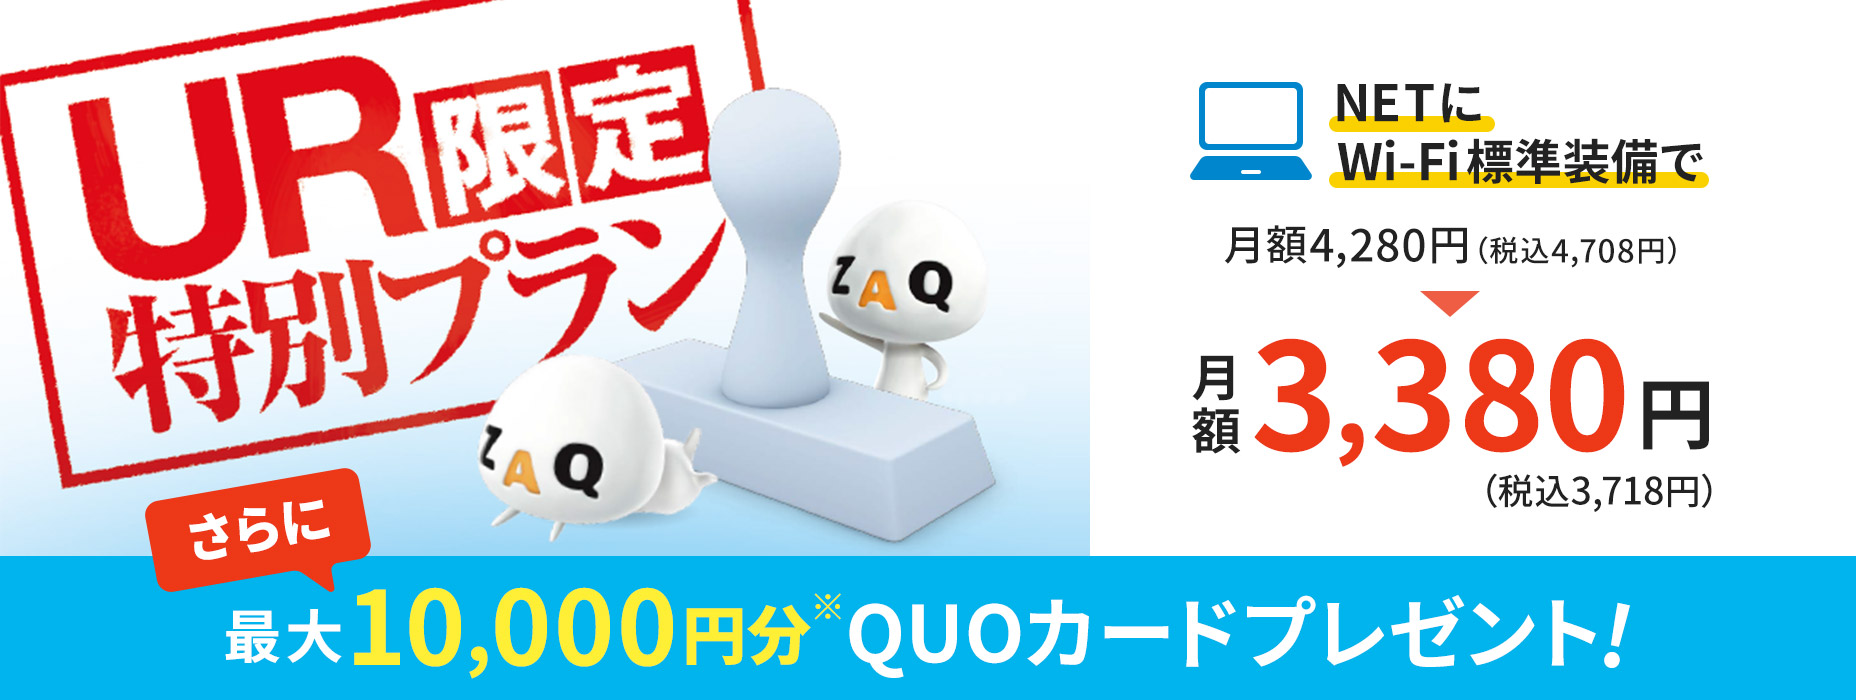 UR limited special plan Wi-Fi standard equipment on NET QUO card gift of up to 10,000 yen